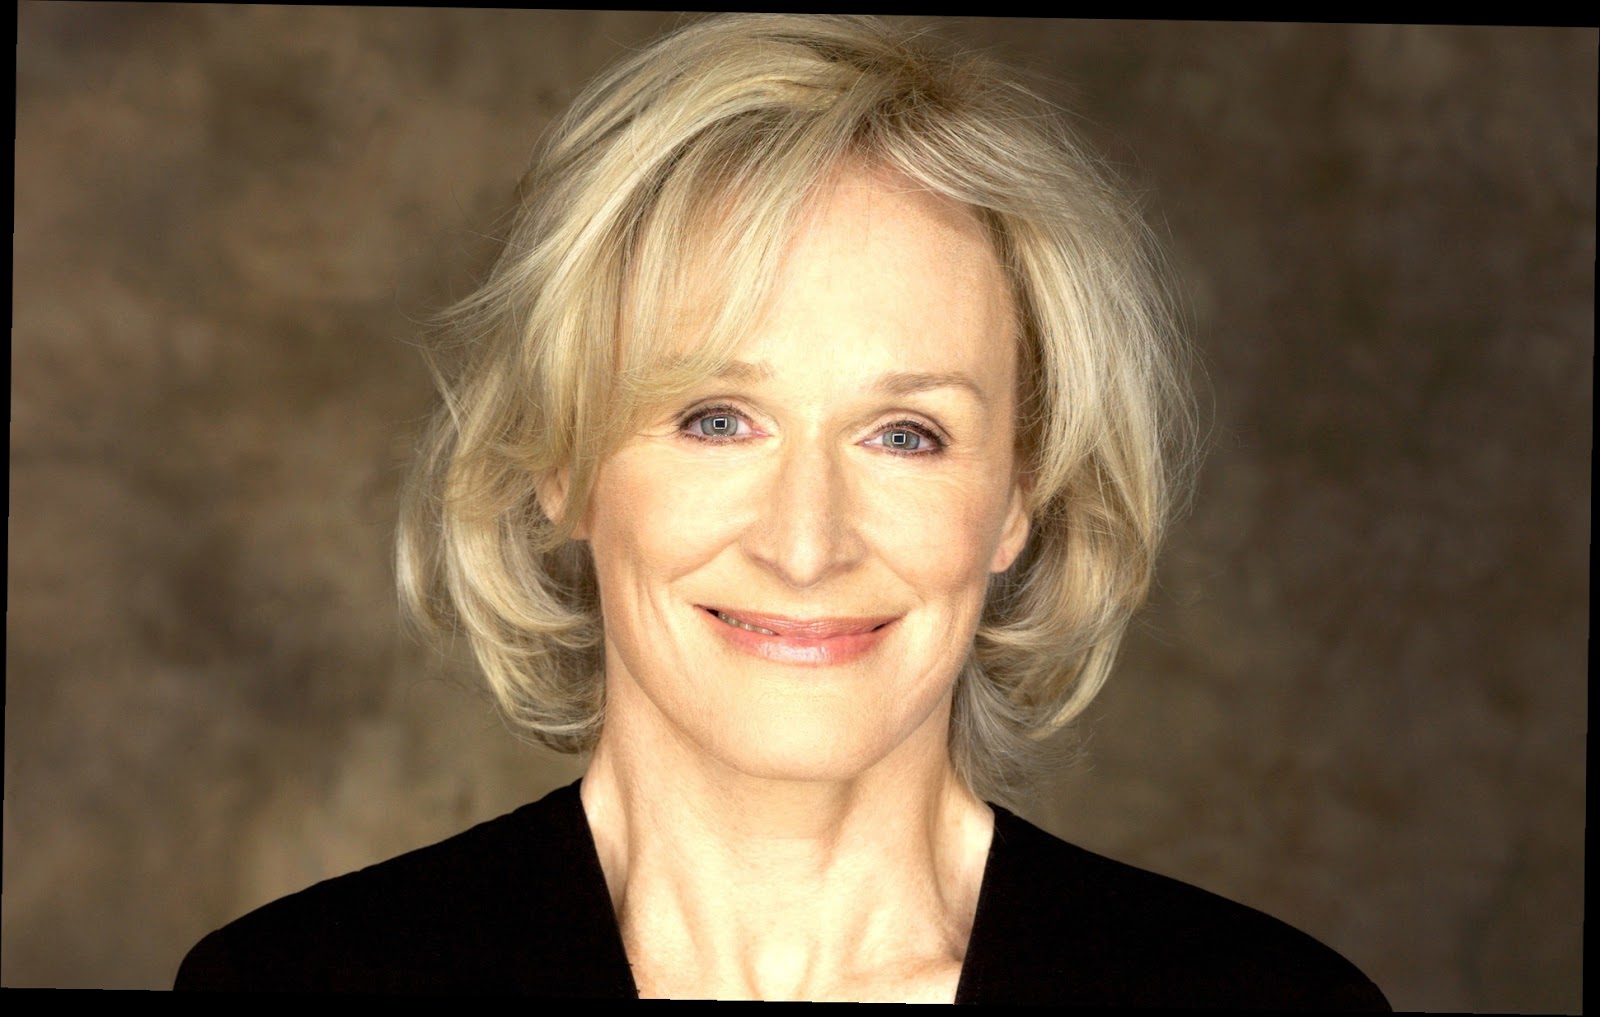 Glenn Close Upcoming Movies 2016 'What Happened to Monday?' Find on wikipedia, imdb, Facebook, Twitter, Google Plus